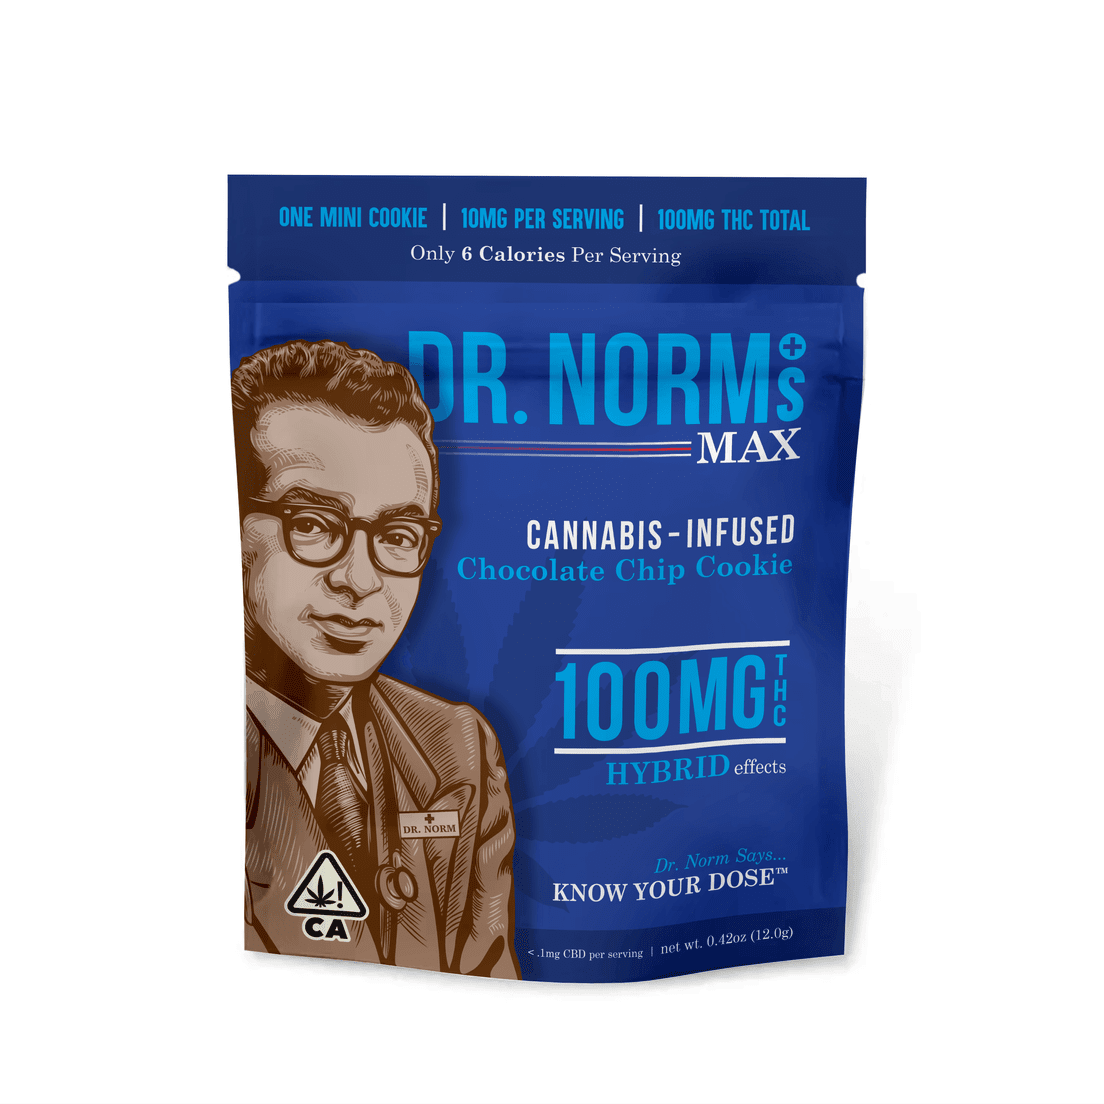 100mg (SINGLE) Chocolate Chip Cookie MAX - DR. NORMS